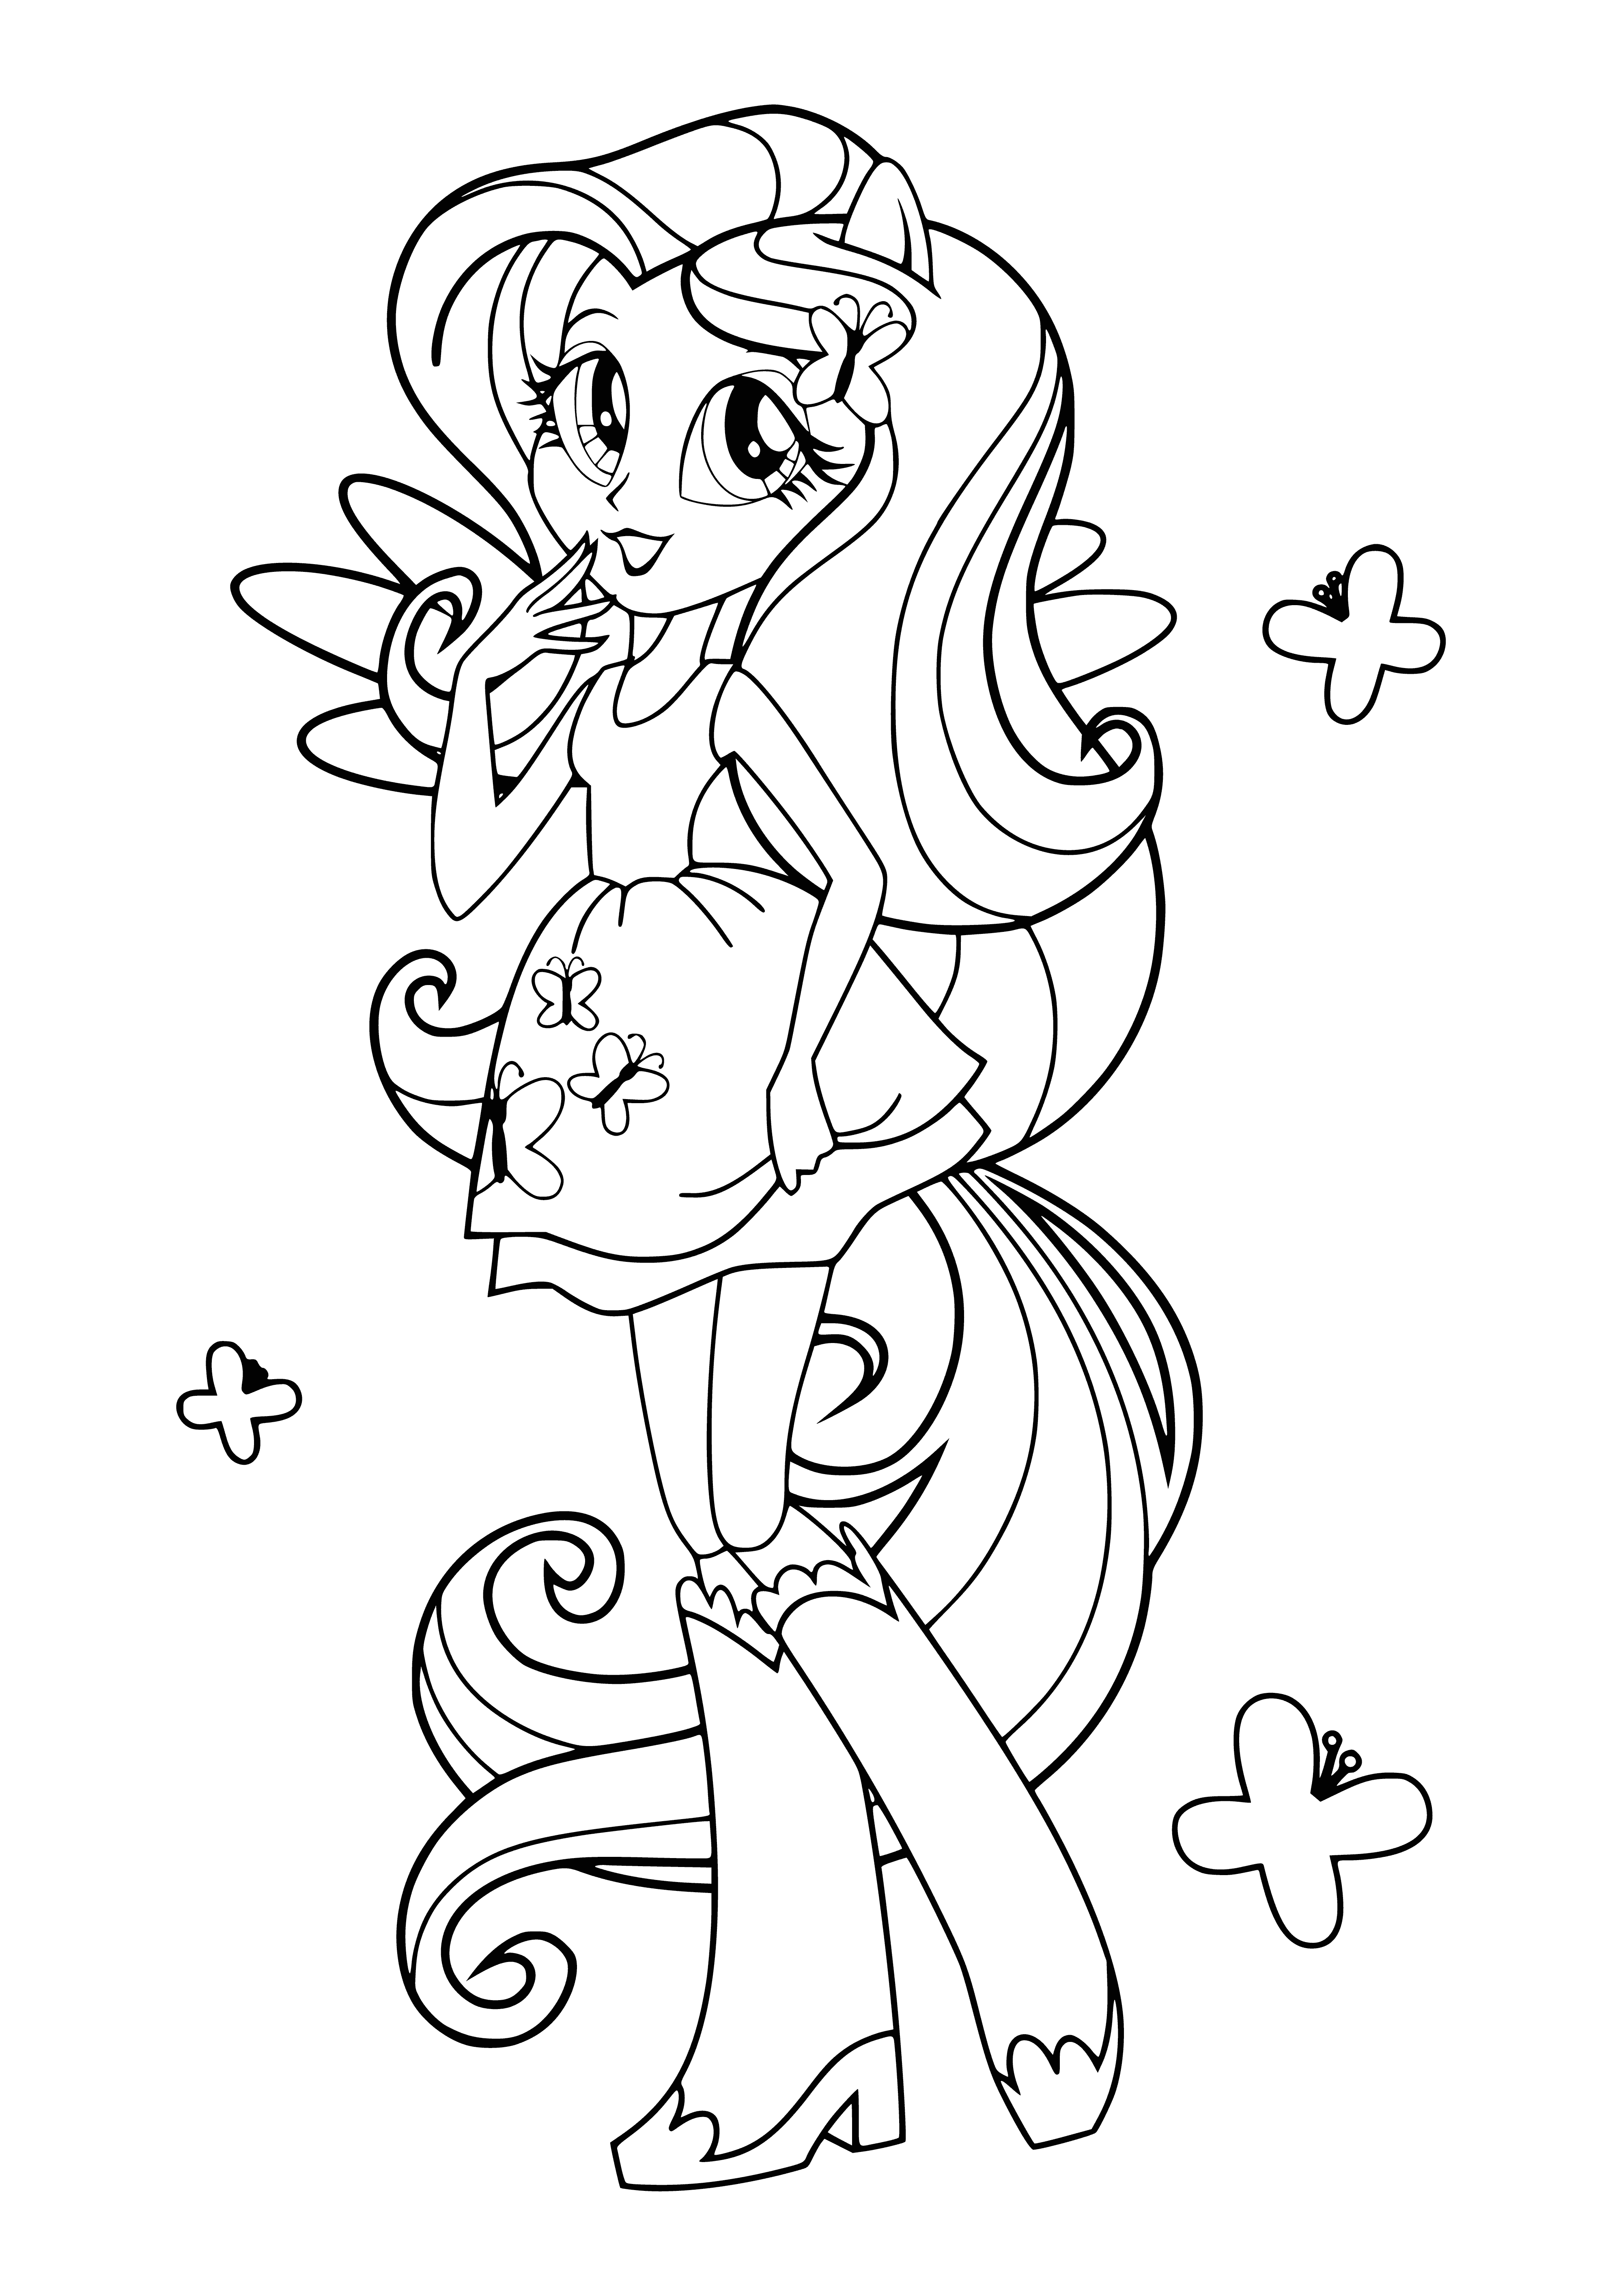 coloring page: Girl standing in green field, holding reins of light blue horse with flowing mane & tail; pink & blue scarf, blue & white backpack. Sky is blue.